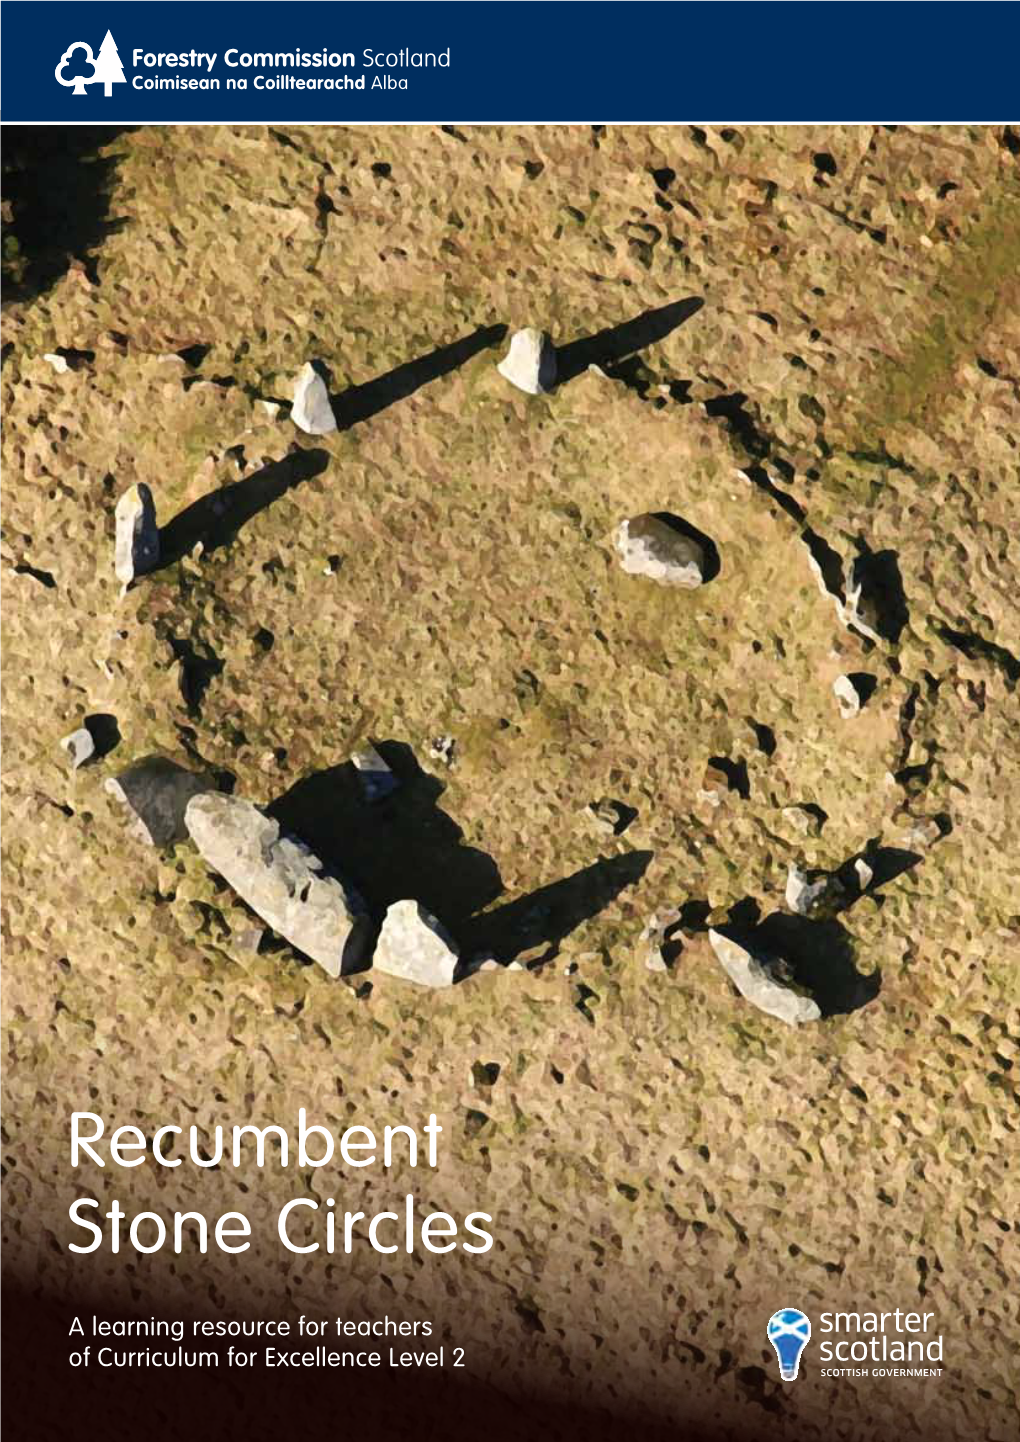 Recumbent Stone Circles Are the Oldest Surviving Structures in the North East and Are Amongst the Oldest Structures in Scotland